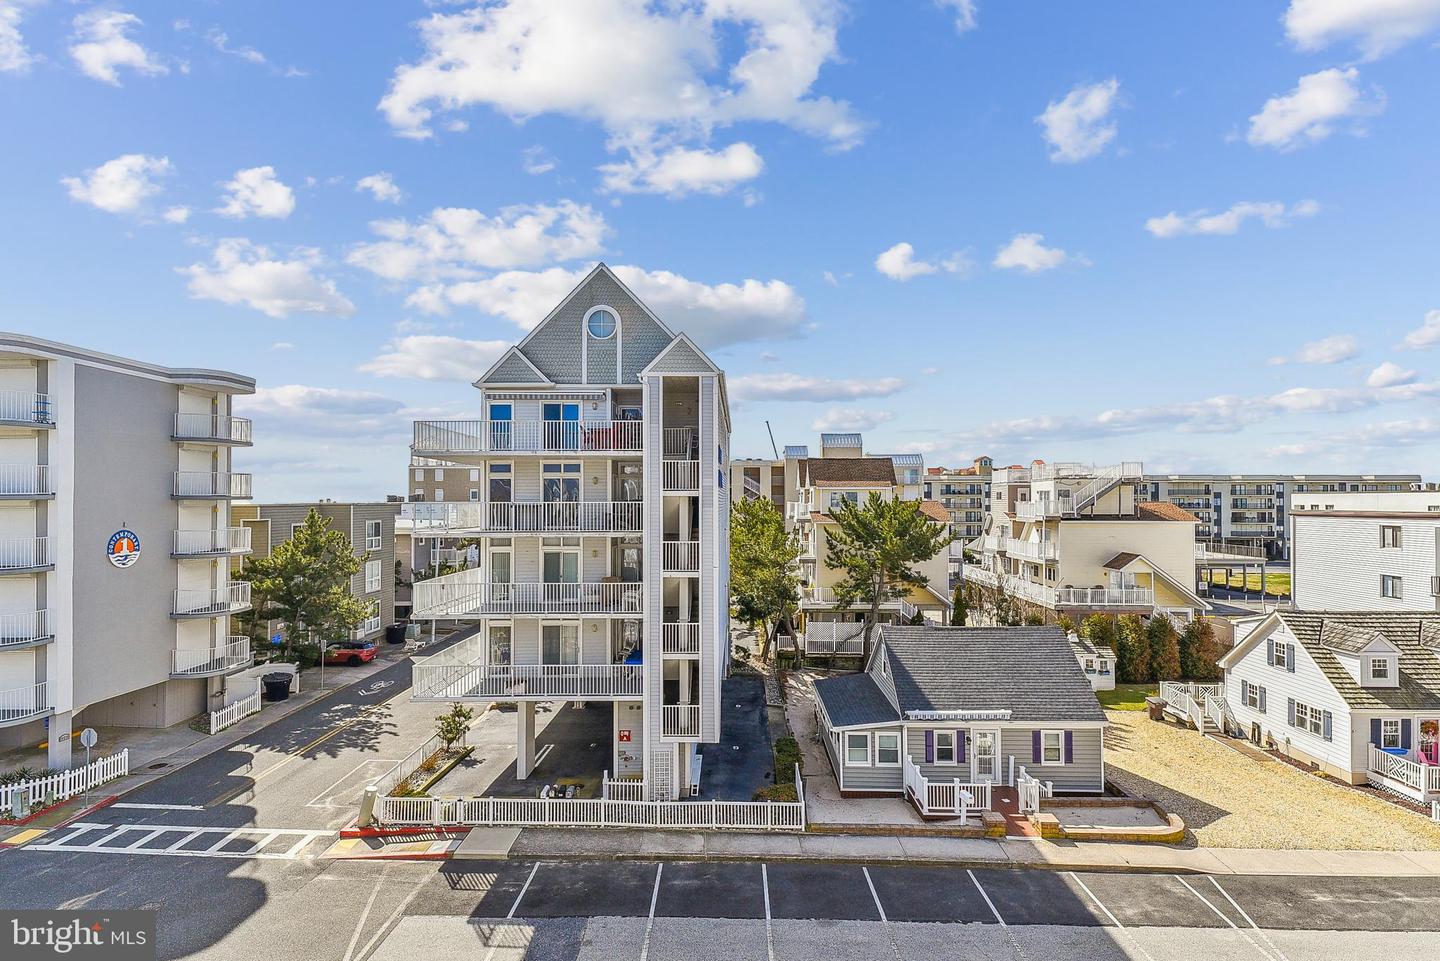 MDWO2019340-802917240290-2024-03-12-11-41-09 14301 Wight St #201 | Ocean City, MD Real Estate For Sale | MLS# Mdwo2019340  - 1st Choice Properties